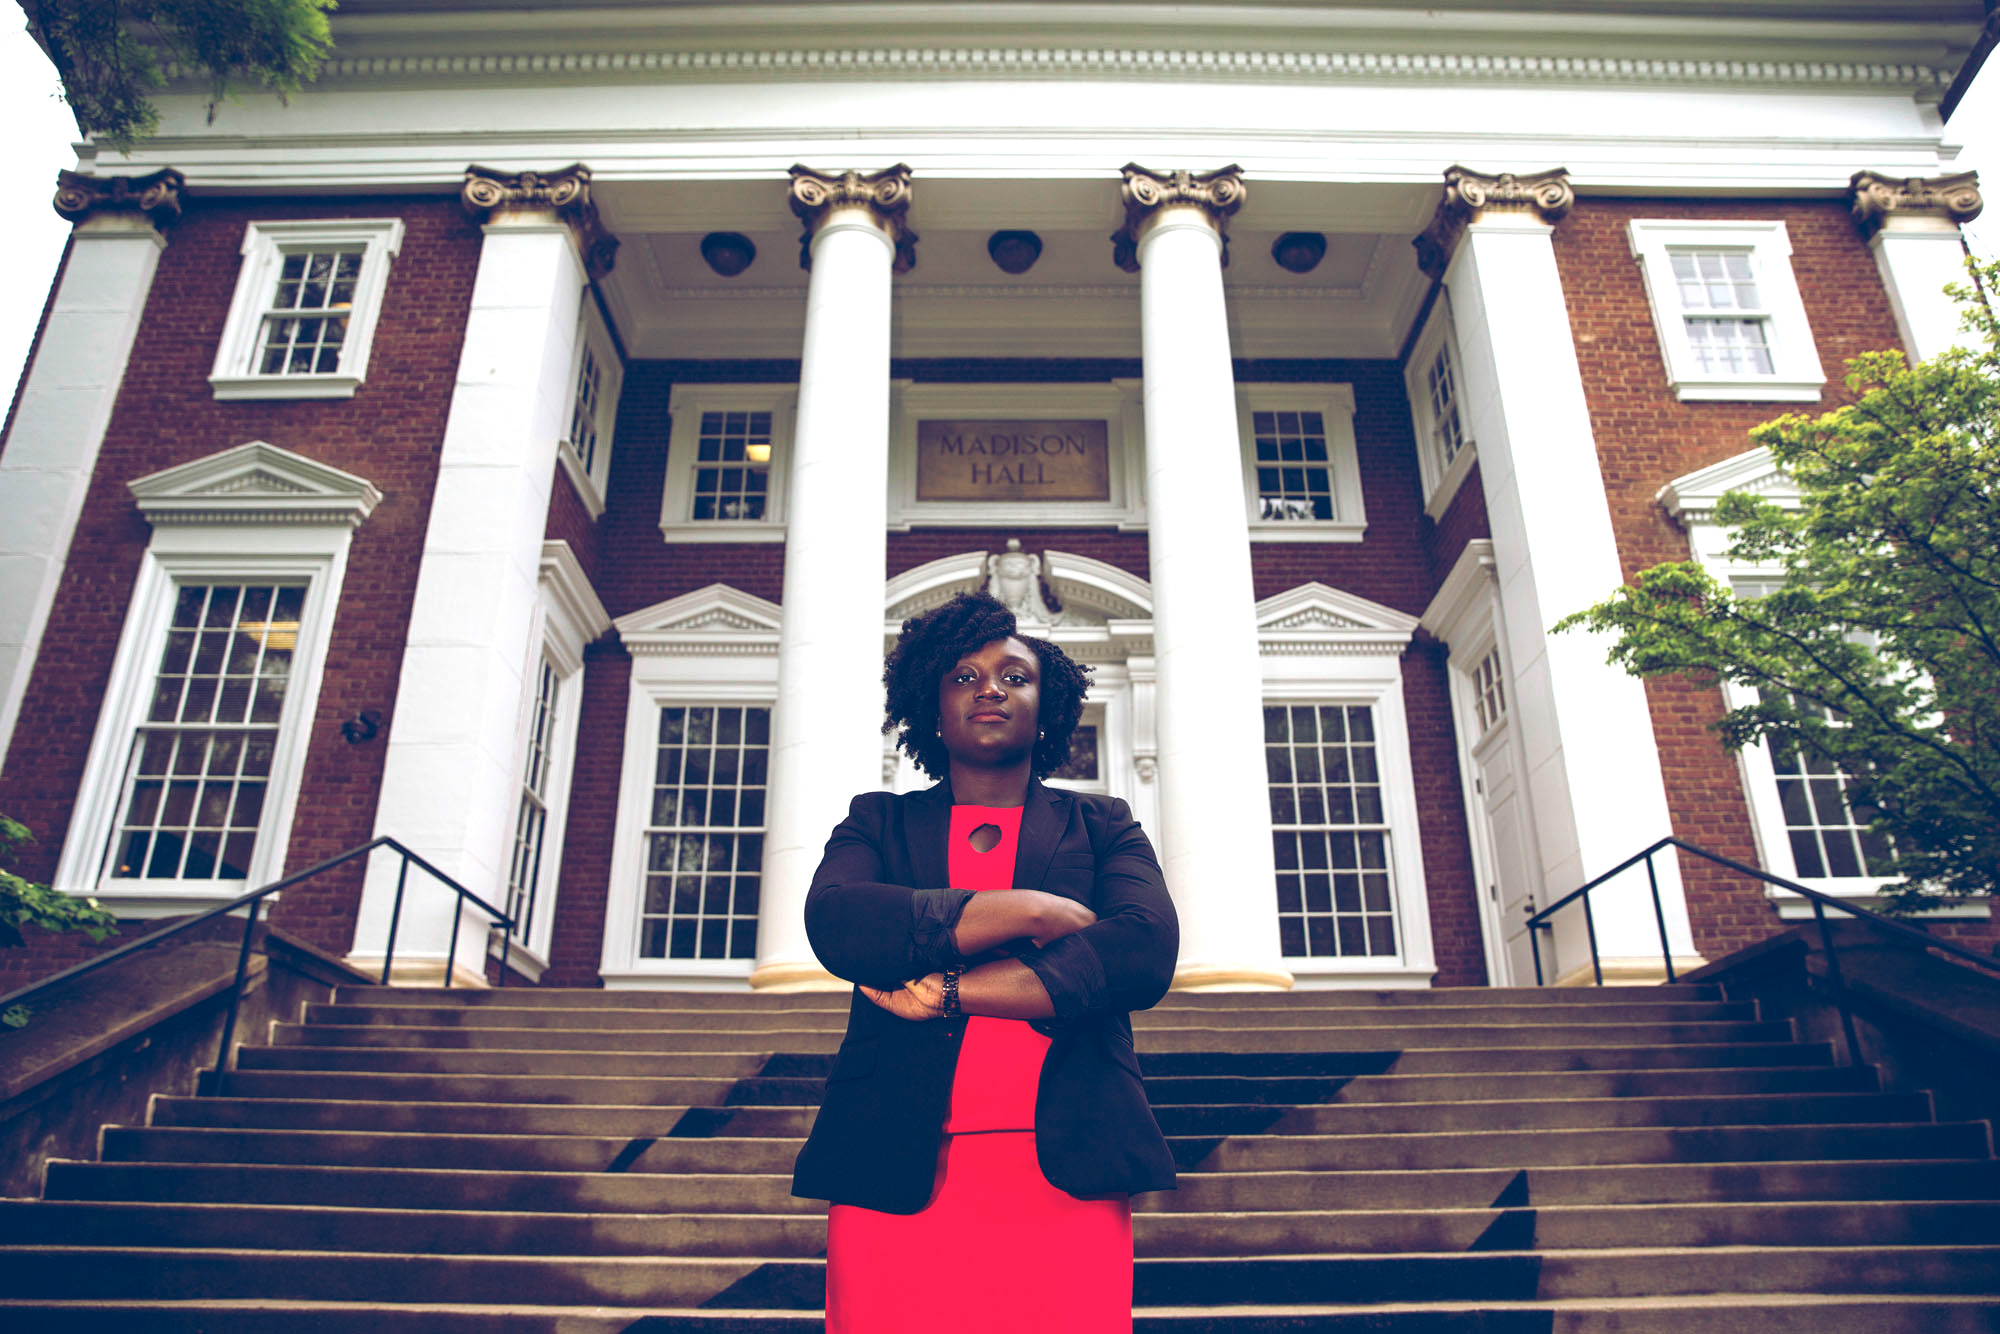 Ursula Gbe stands in front of Madison Hall